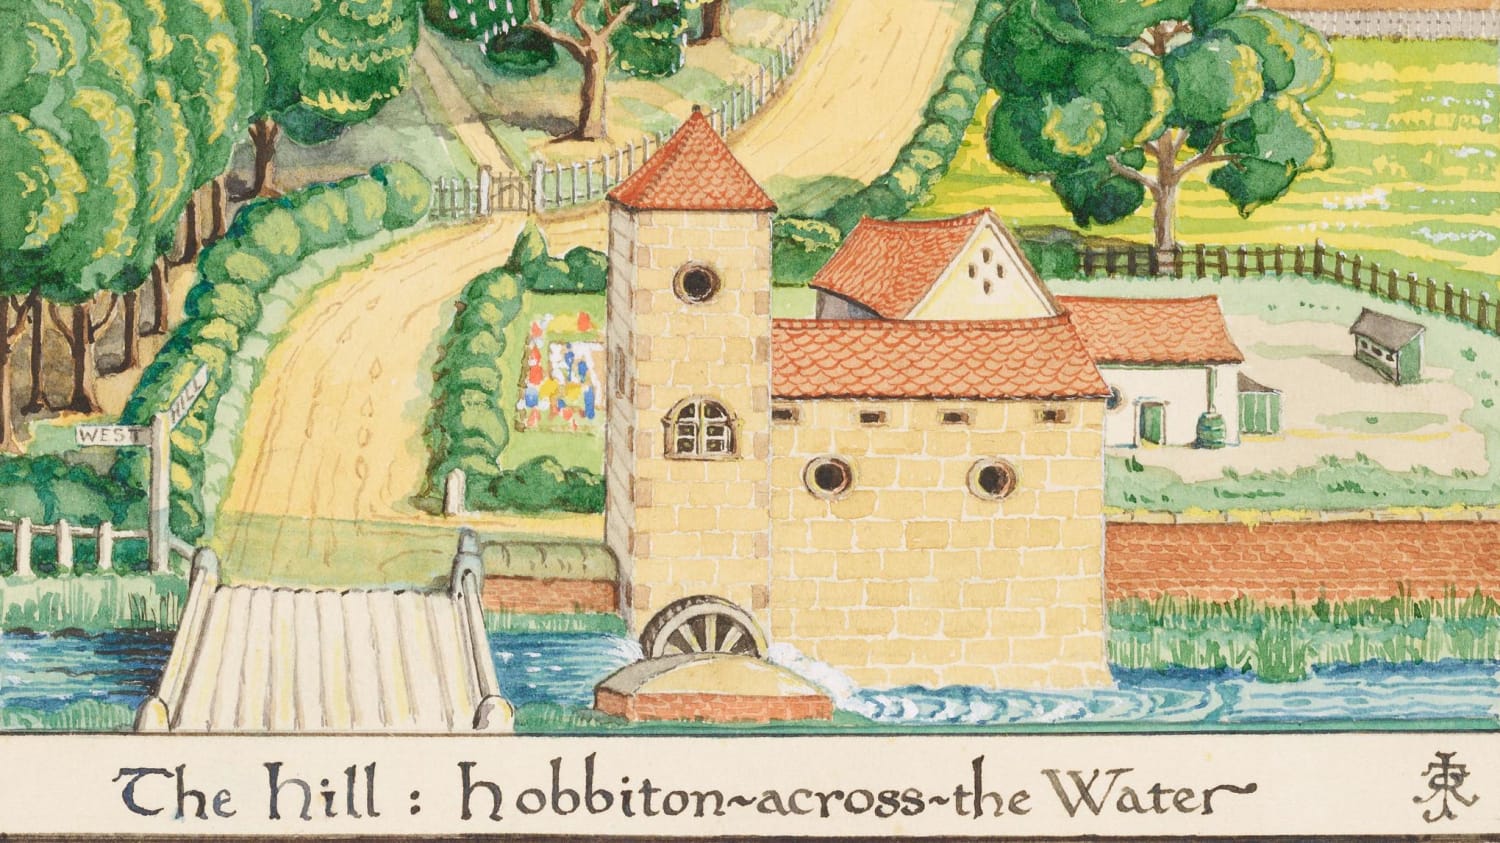 Tolkien’s drawings reveal a wizard at work